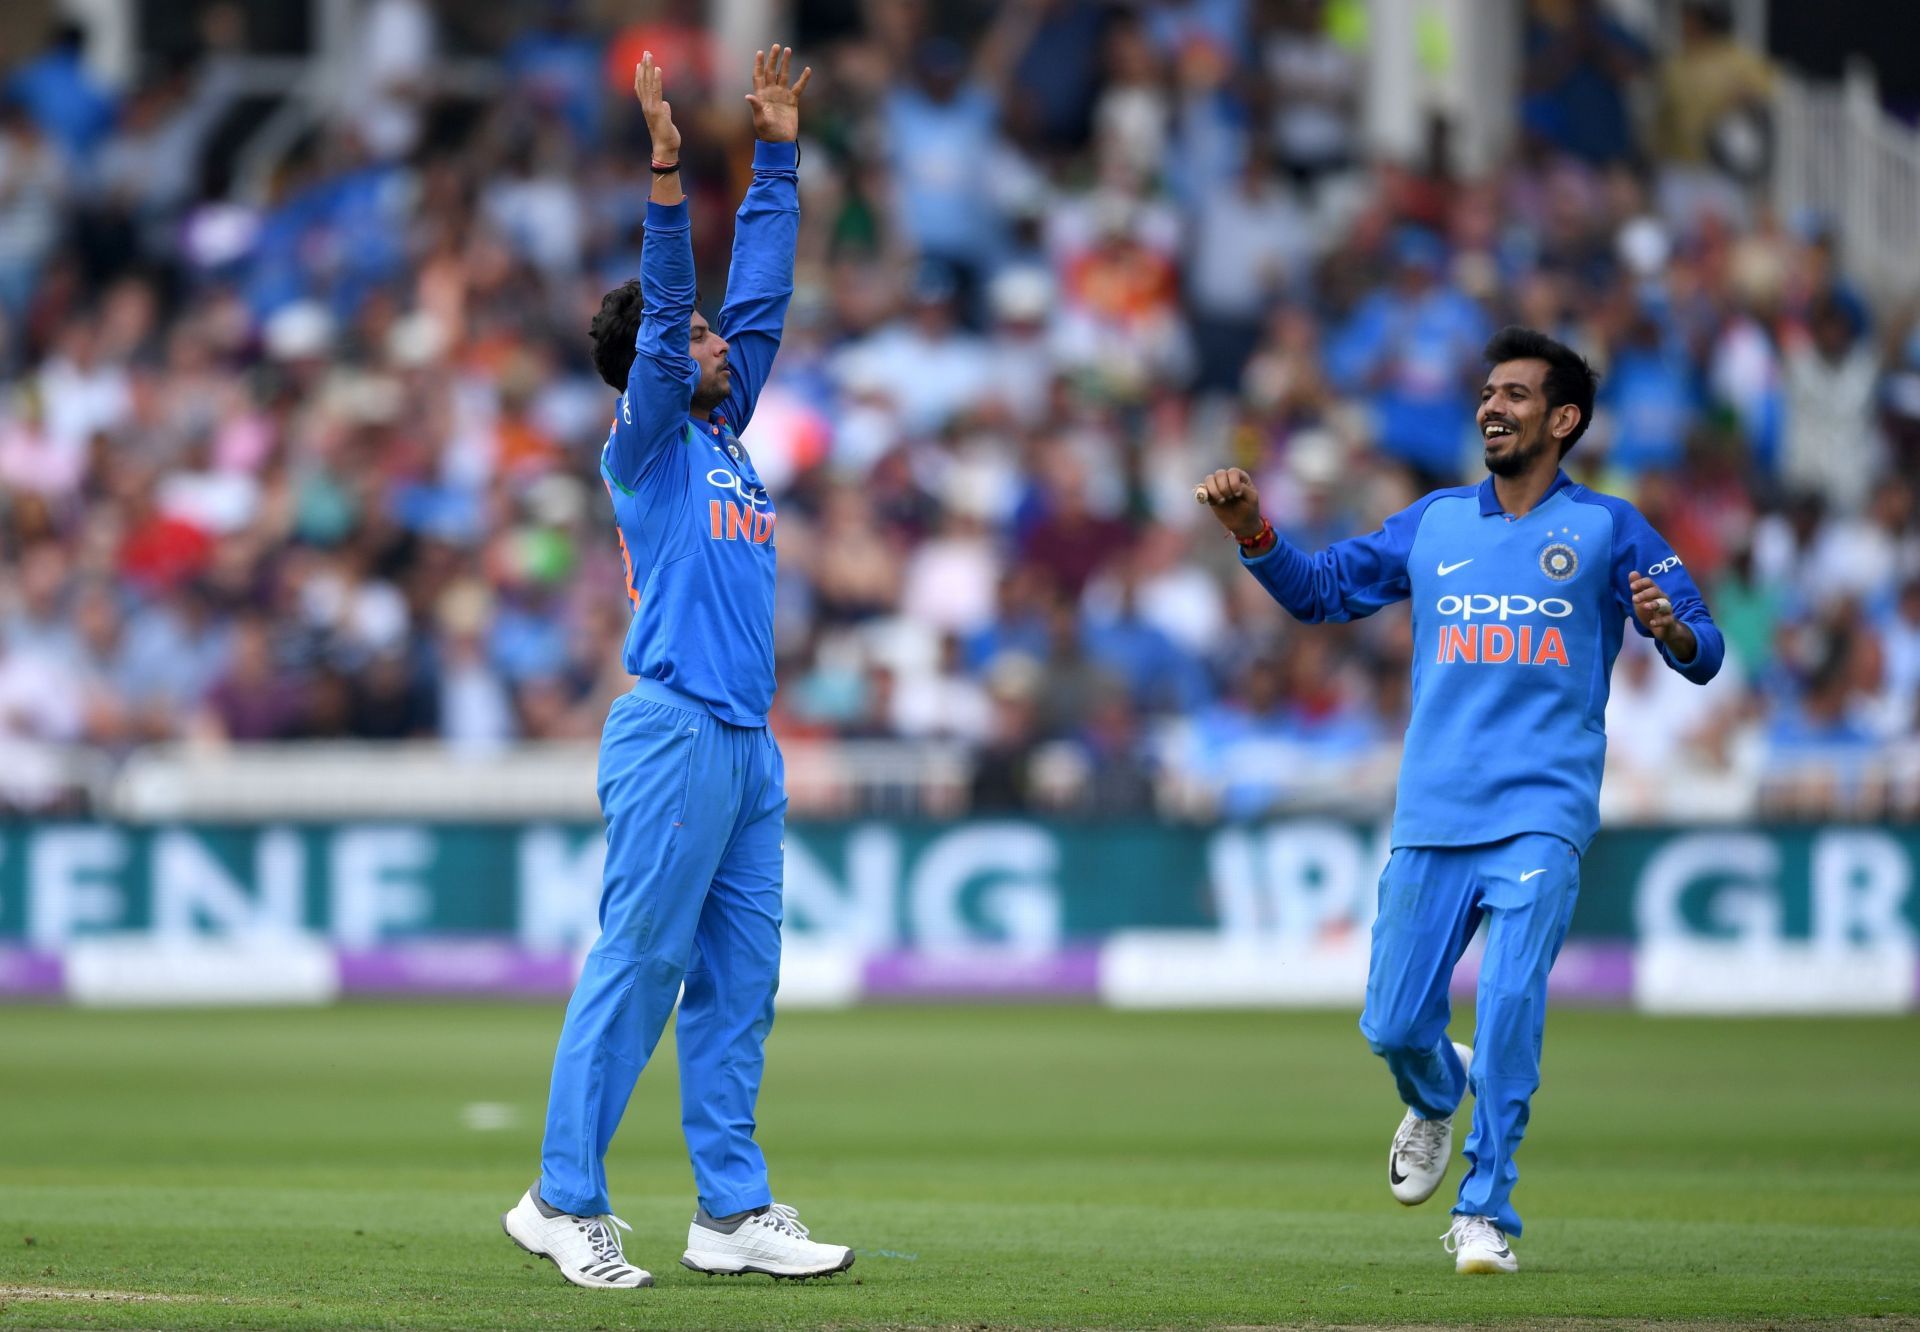 Kuldeep Yadav and Chahal were taken to the cleaners by the England batters in the 2019 World Cup